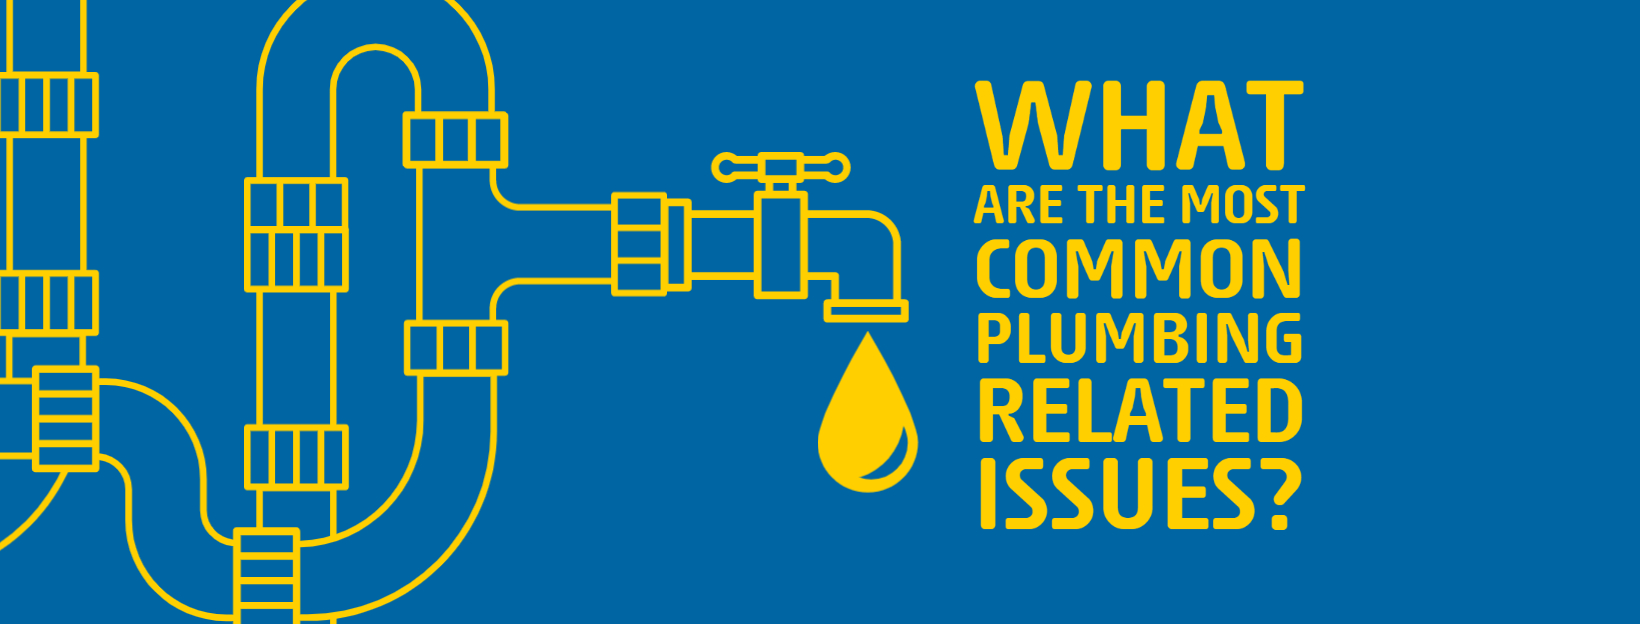 What Are the Most Common Plumbing Related Issues?